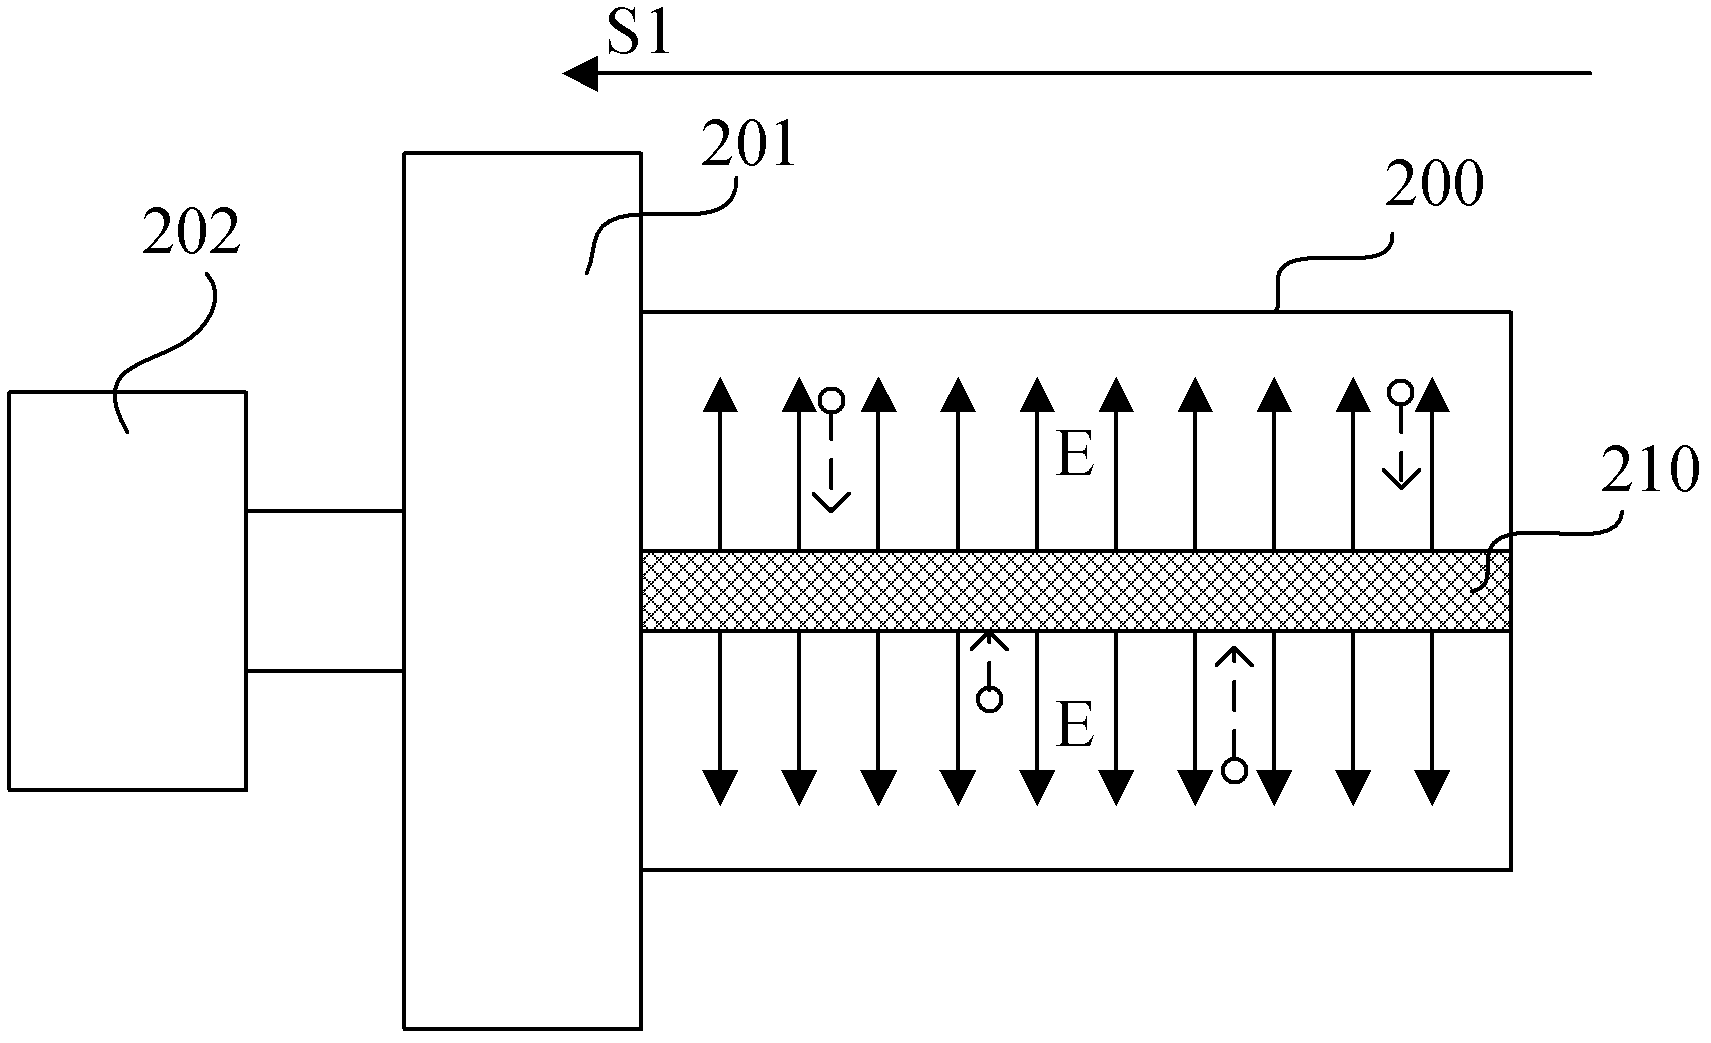 Method for manufacturing CMOS (complementary metal-oxide-semiconductor transistor) image sensor